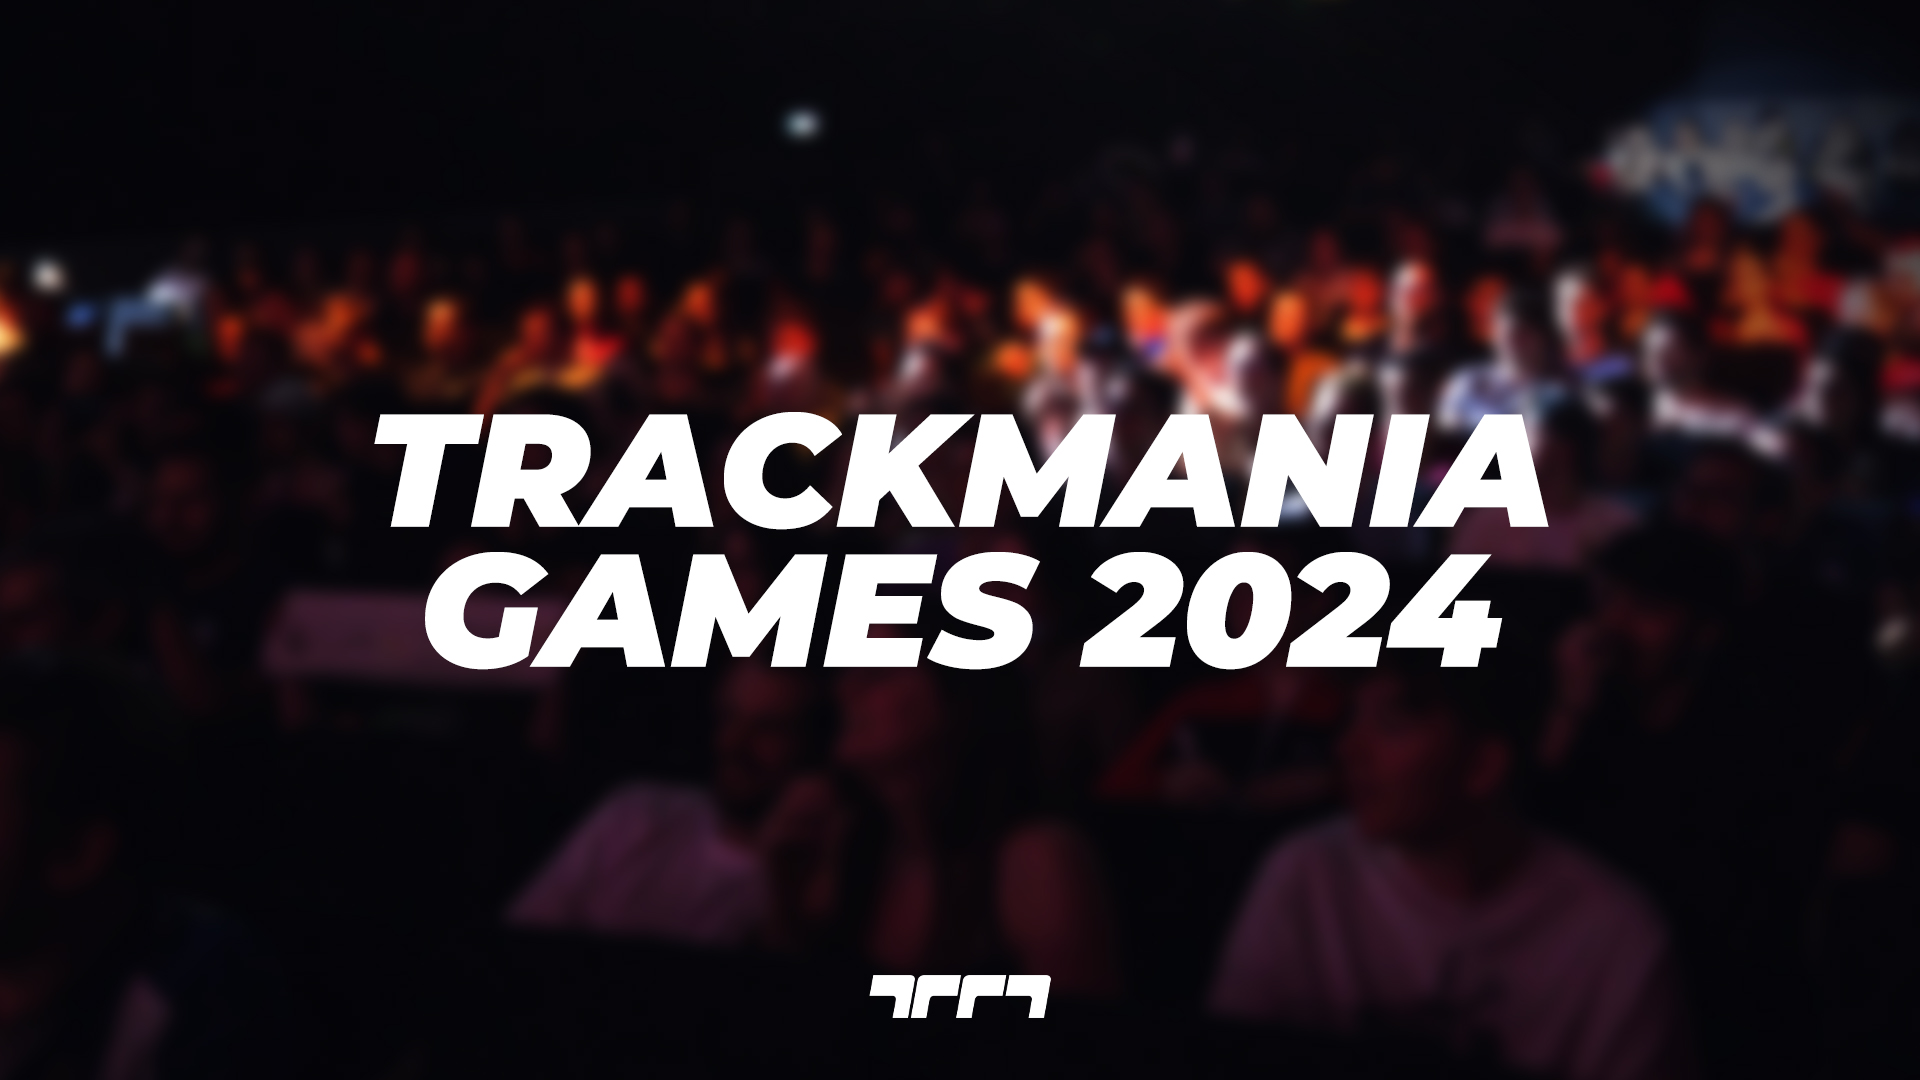 Trackmania Games, a new esports competition coming to Paris, France in Summer 2024